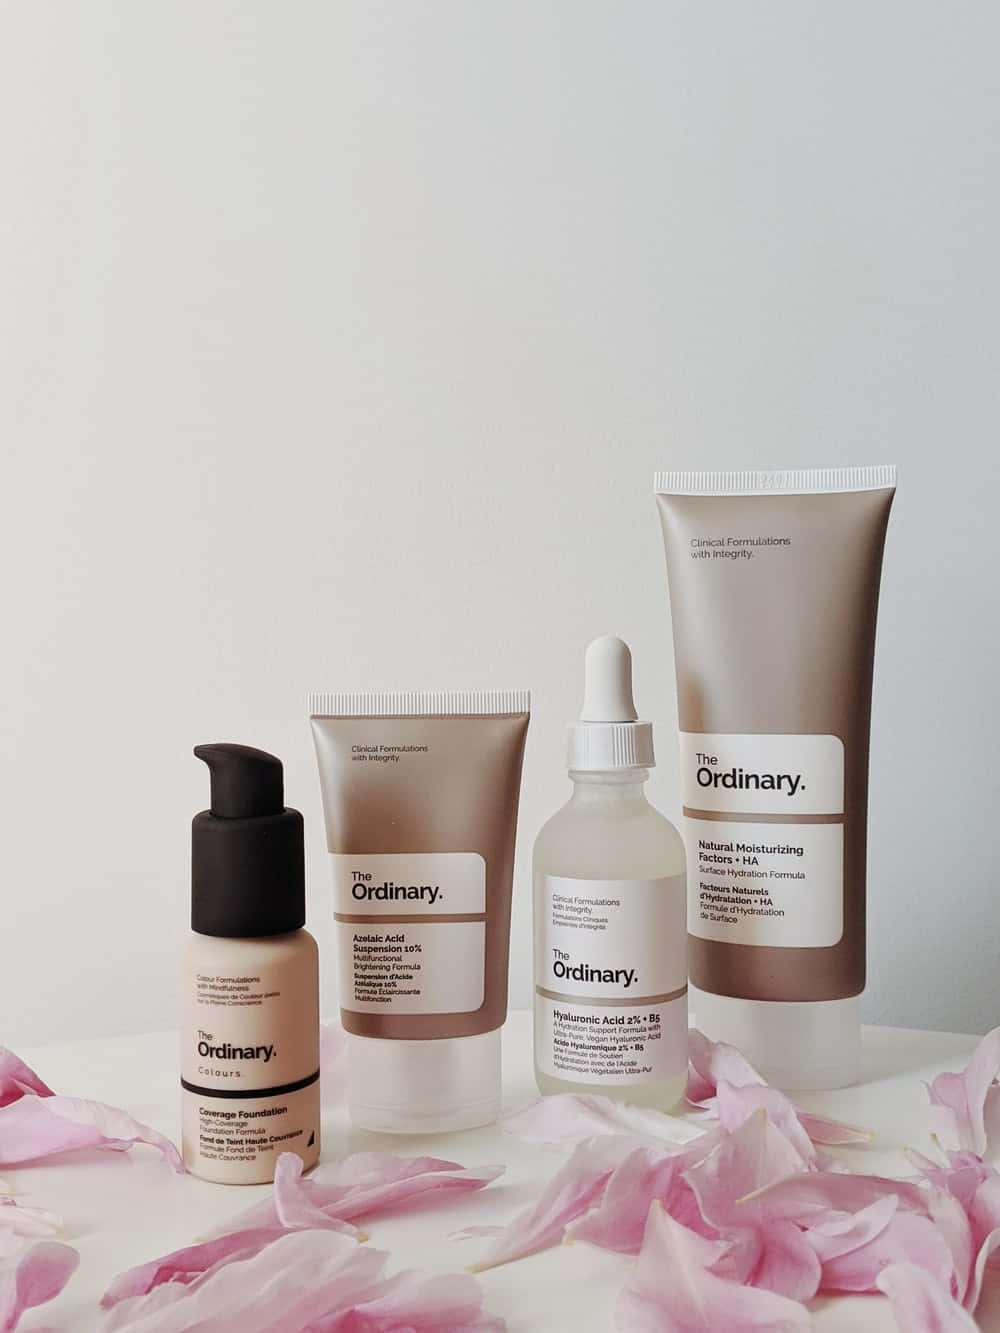 Skincare Products Aesthetic Display Wallpaper